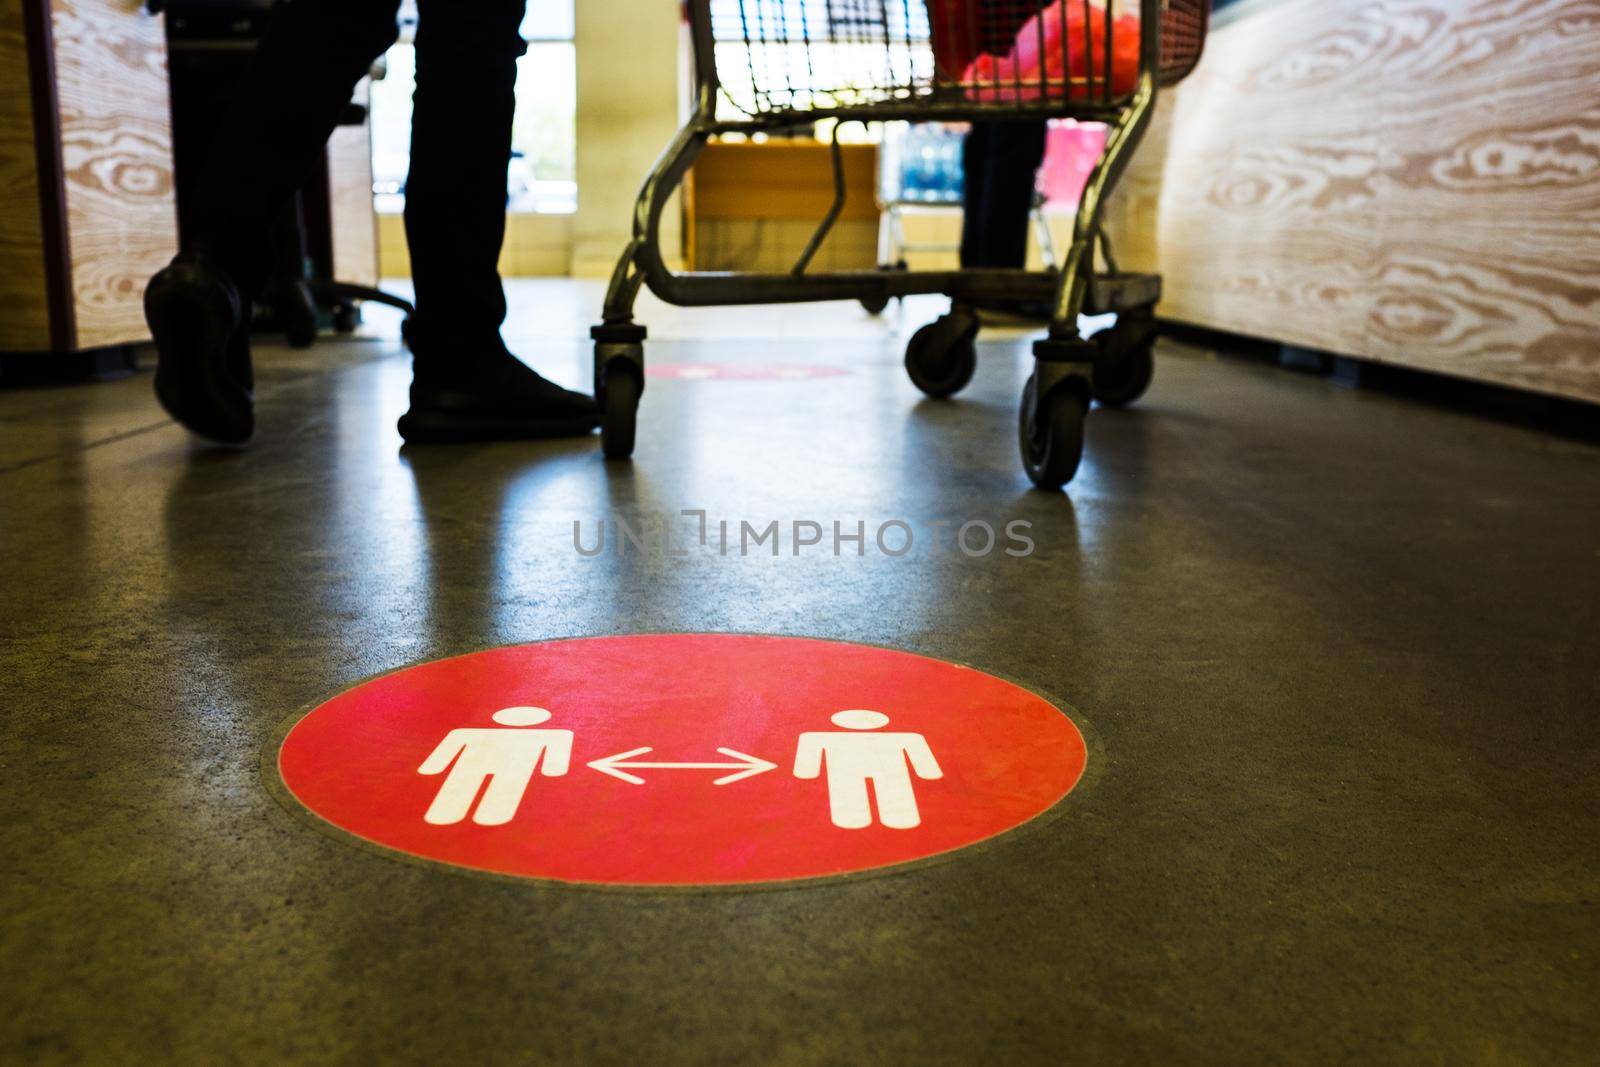 Red round circle sign printed on supermarket grocery store floor,ordering people to queue up at checkout keeping social distance,protection & prevention of spread & transfer of viruses,germs,bacteria